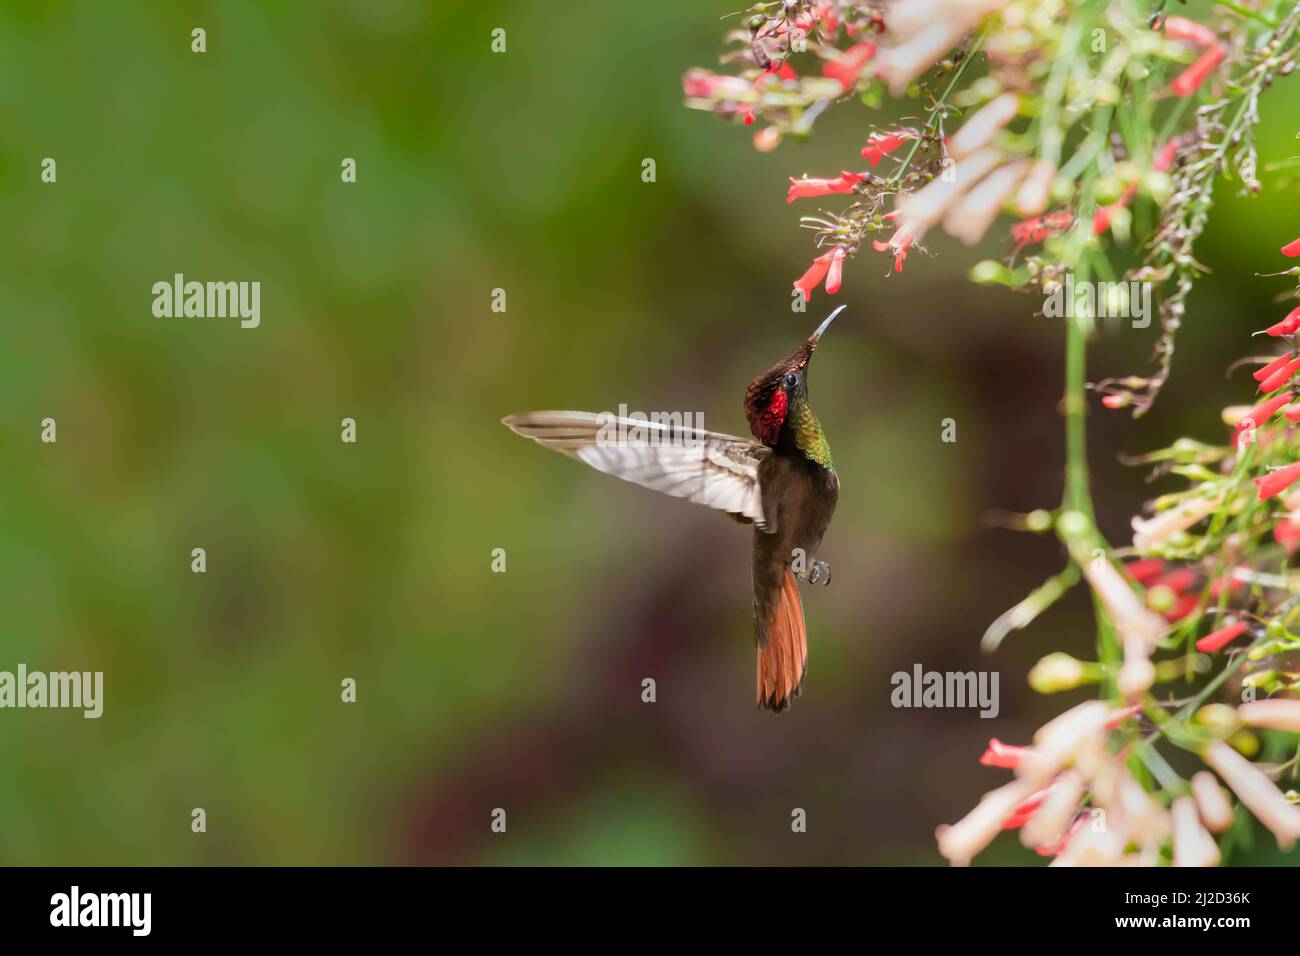 Dreamy scene of a Ruby Topaz hummingbird, Chrysolampis Mosquitus, hovering amongst colorful flowers in a tropical garden. Stock Photo